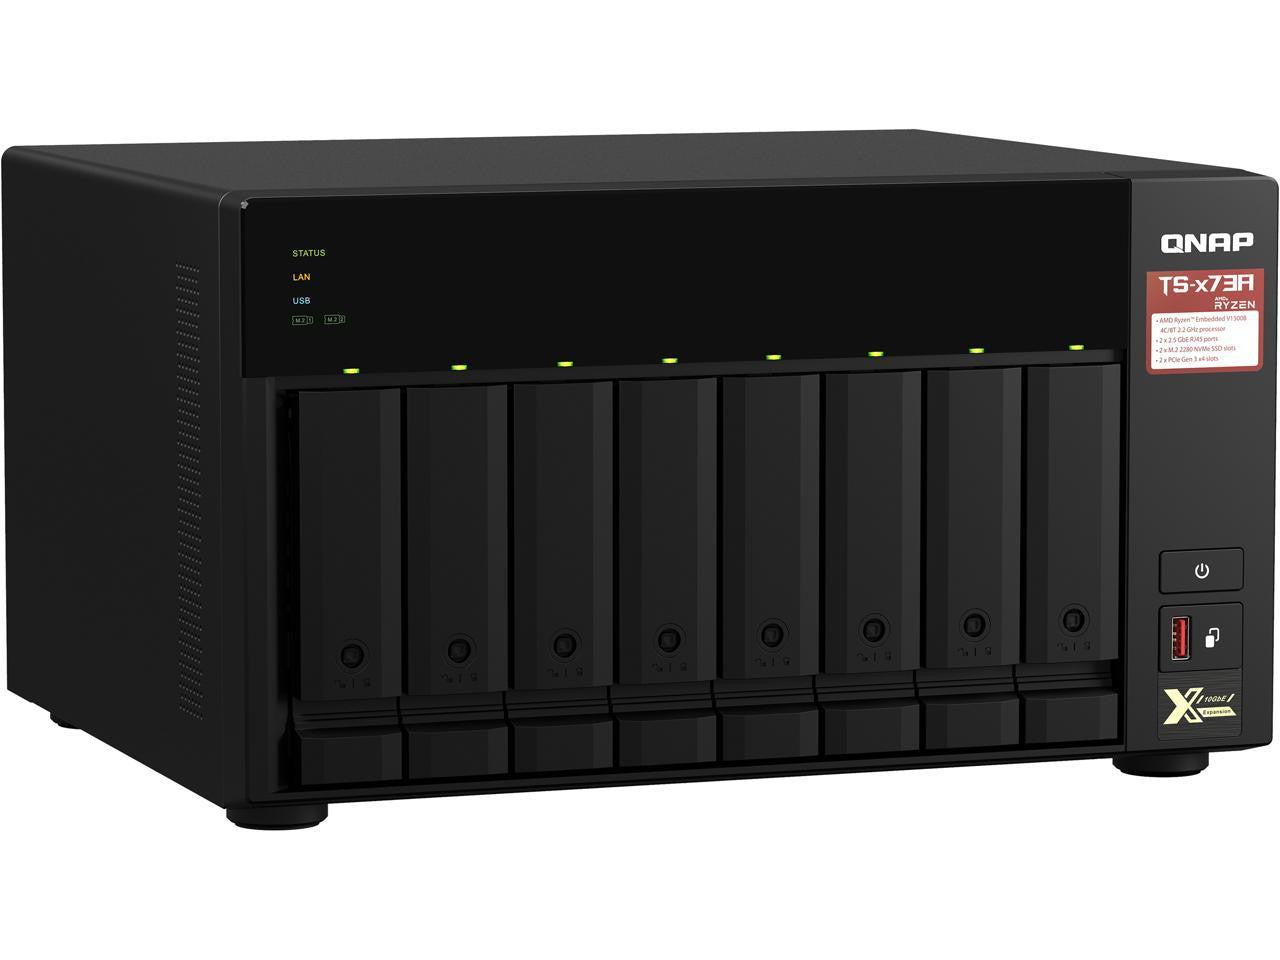 QNAP TS-873A 8-BAY NAS with 8GB DDR4 RAM and 24TB (8x3TB) Western Digital RED PLUS Drives Fully Assembled and Tested